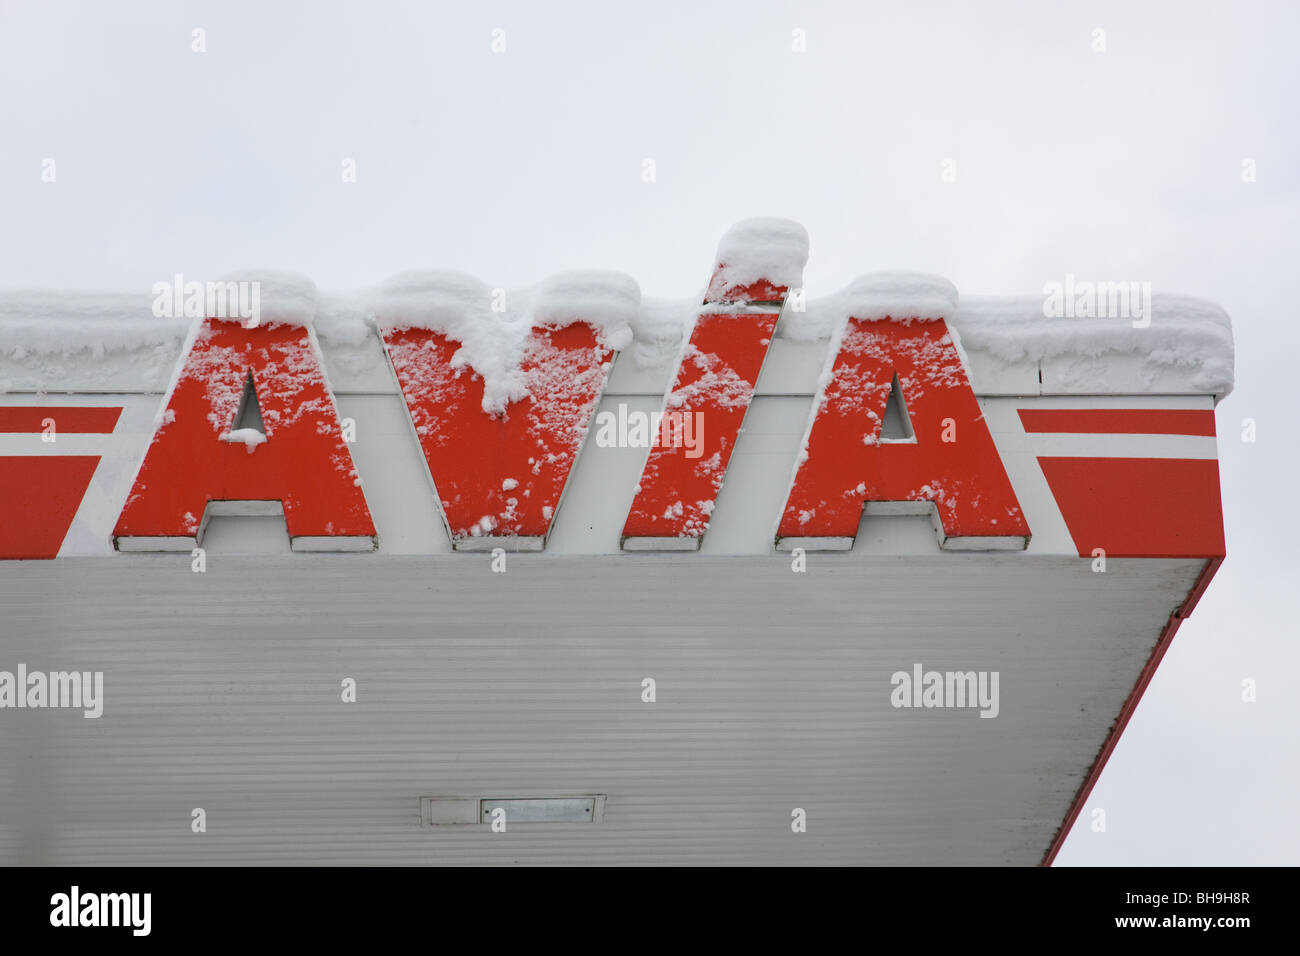 Avia corporate logo covered with snow on a filling station Stock Photo